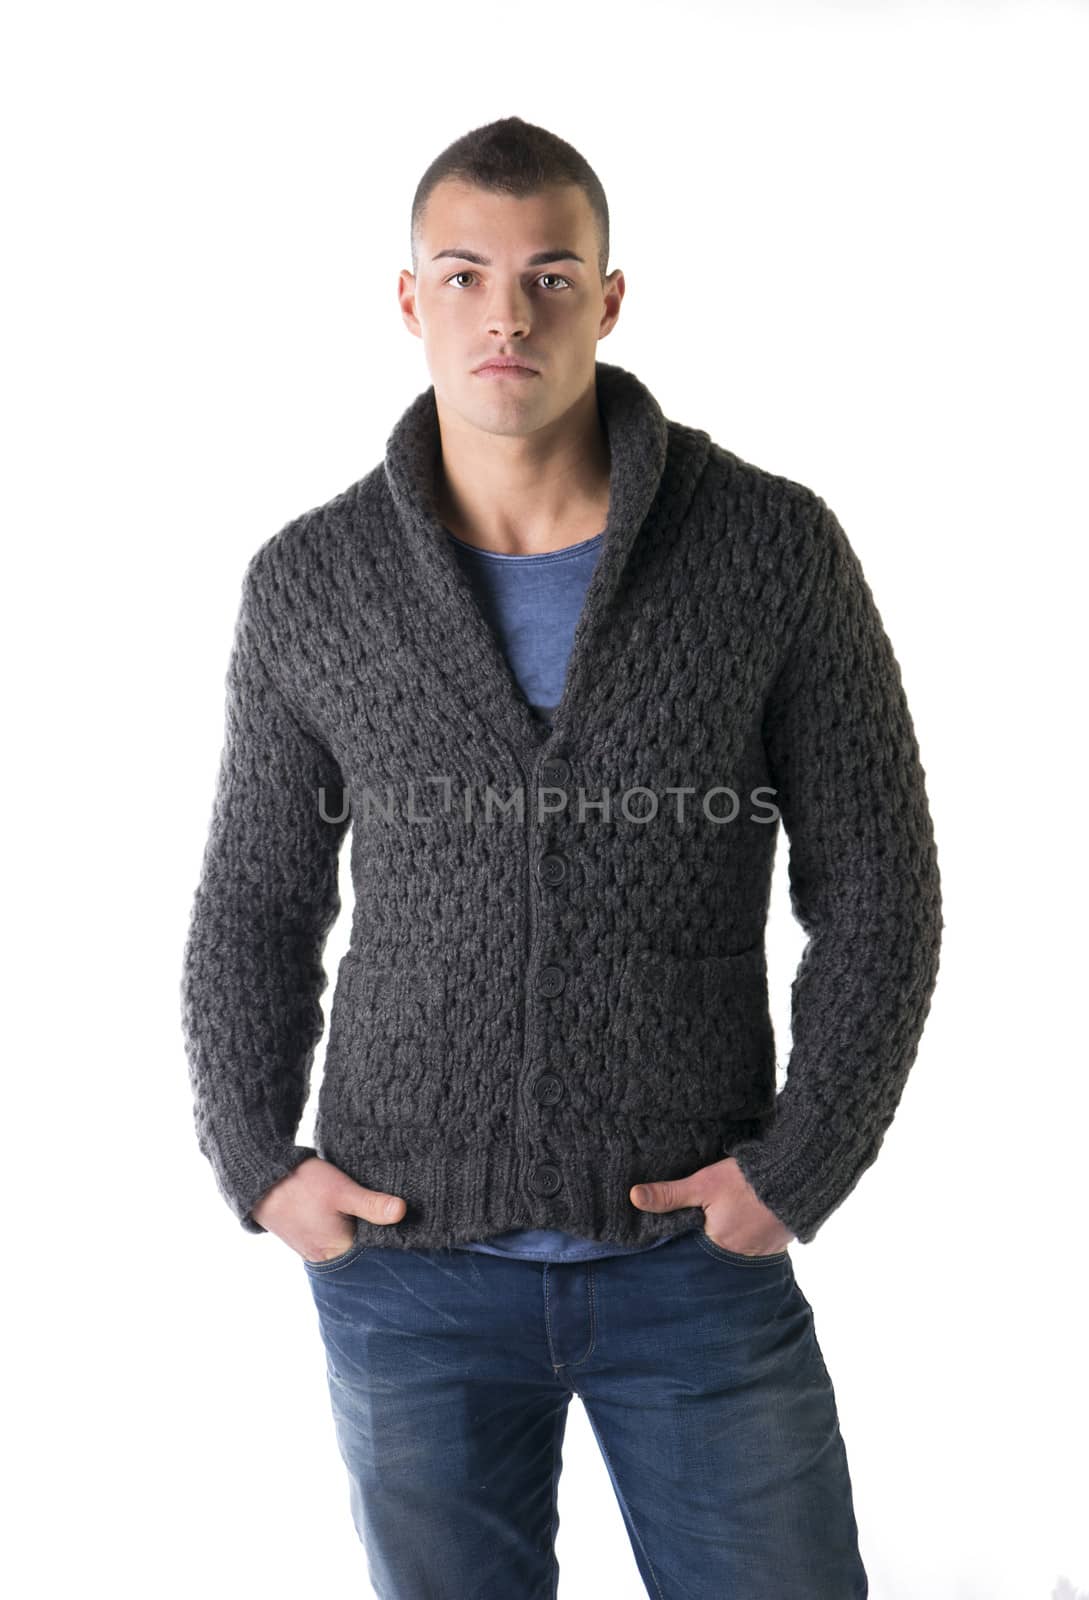 Attractive young man with wool sweater and jeans, isolated on white background